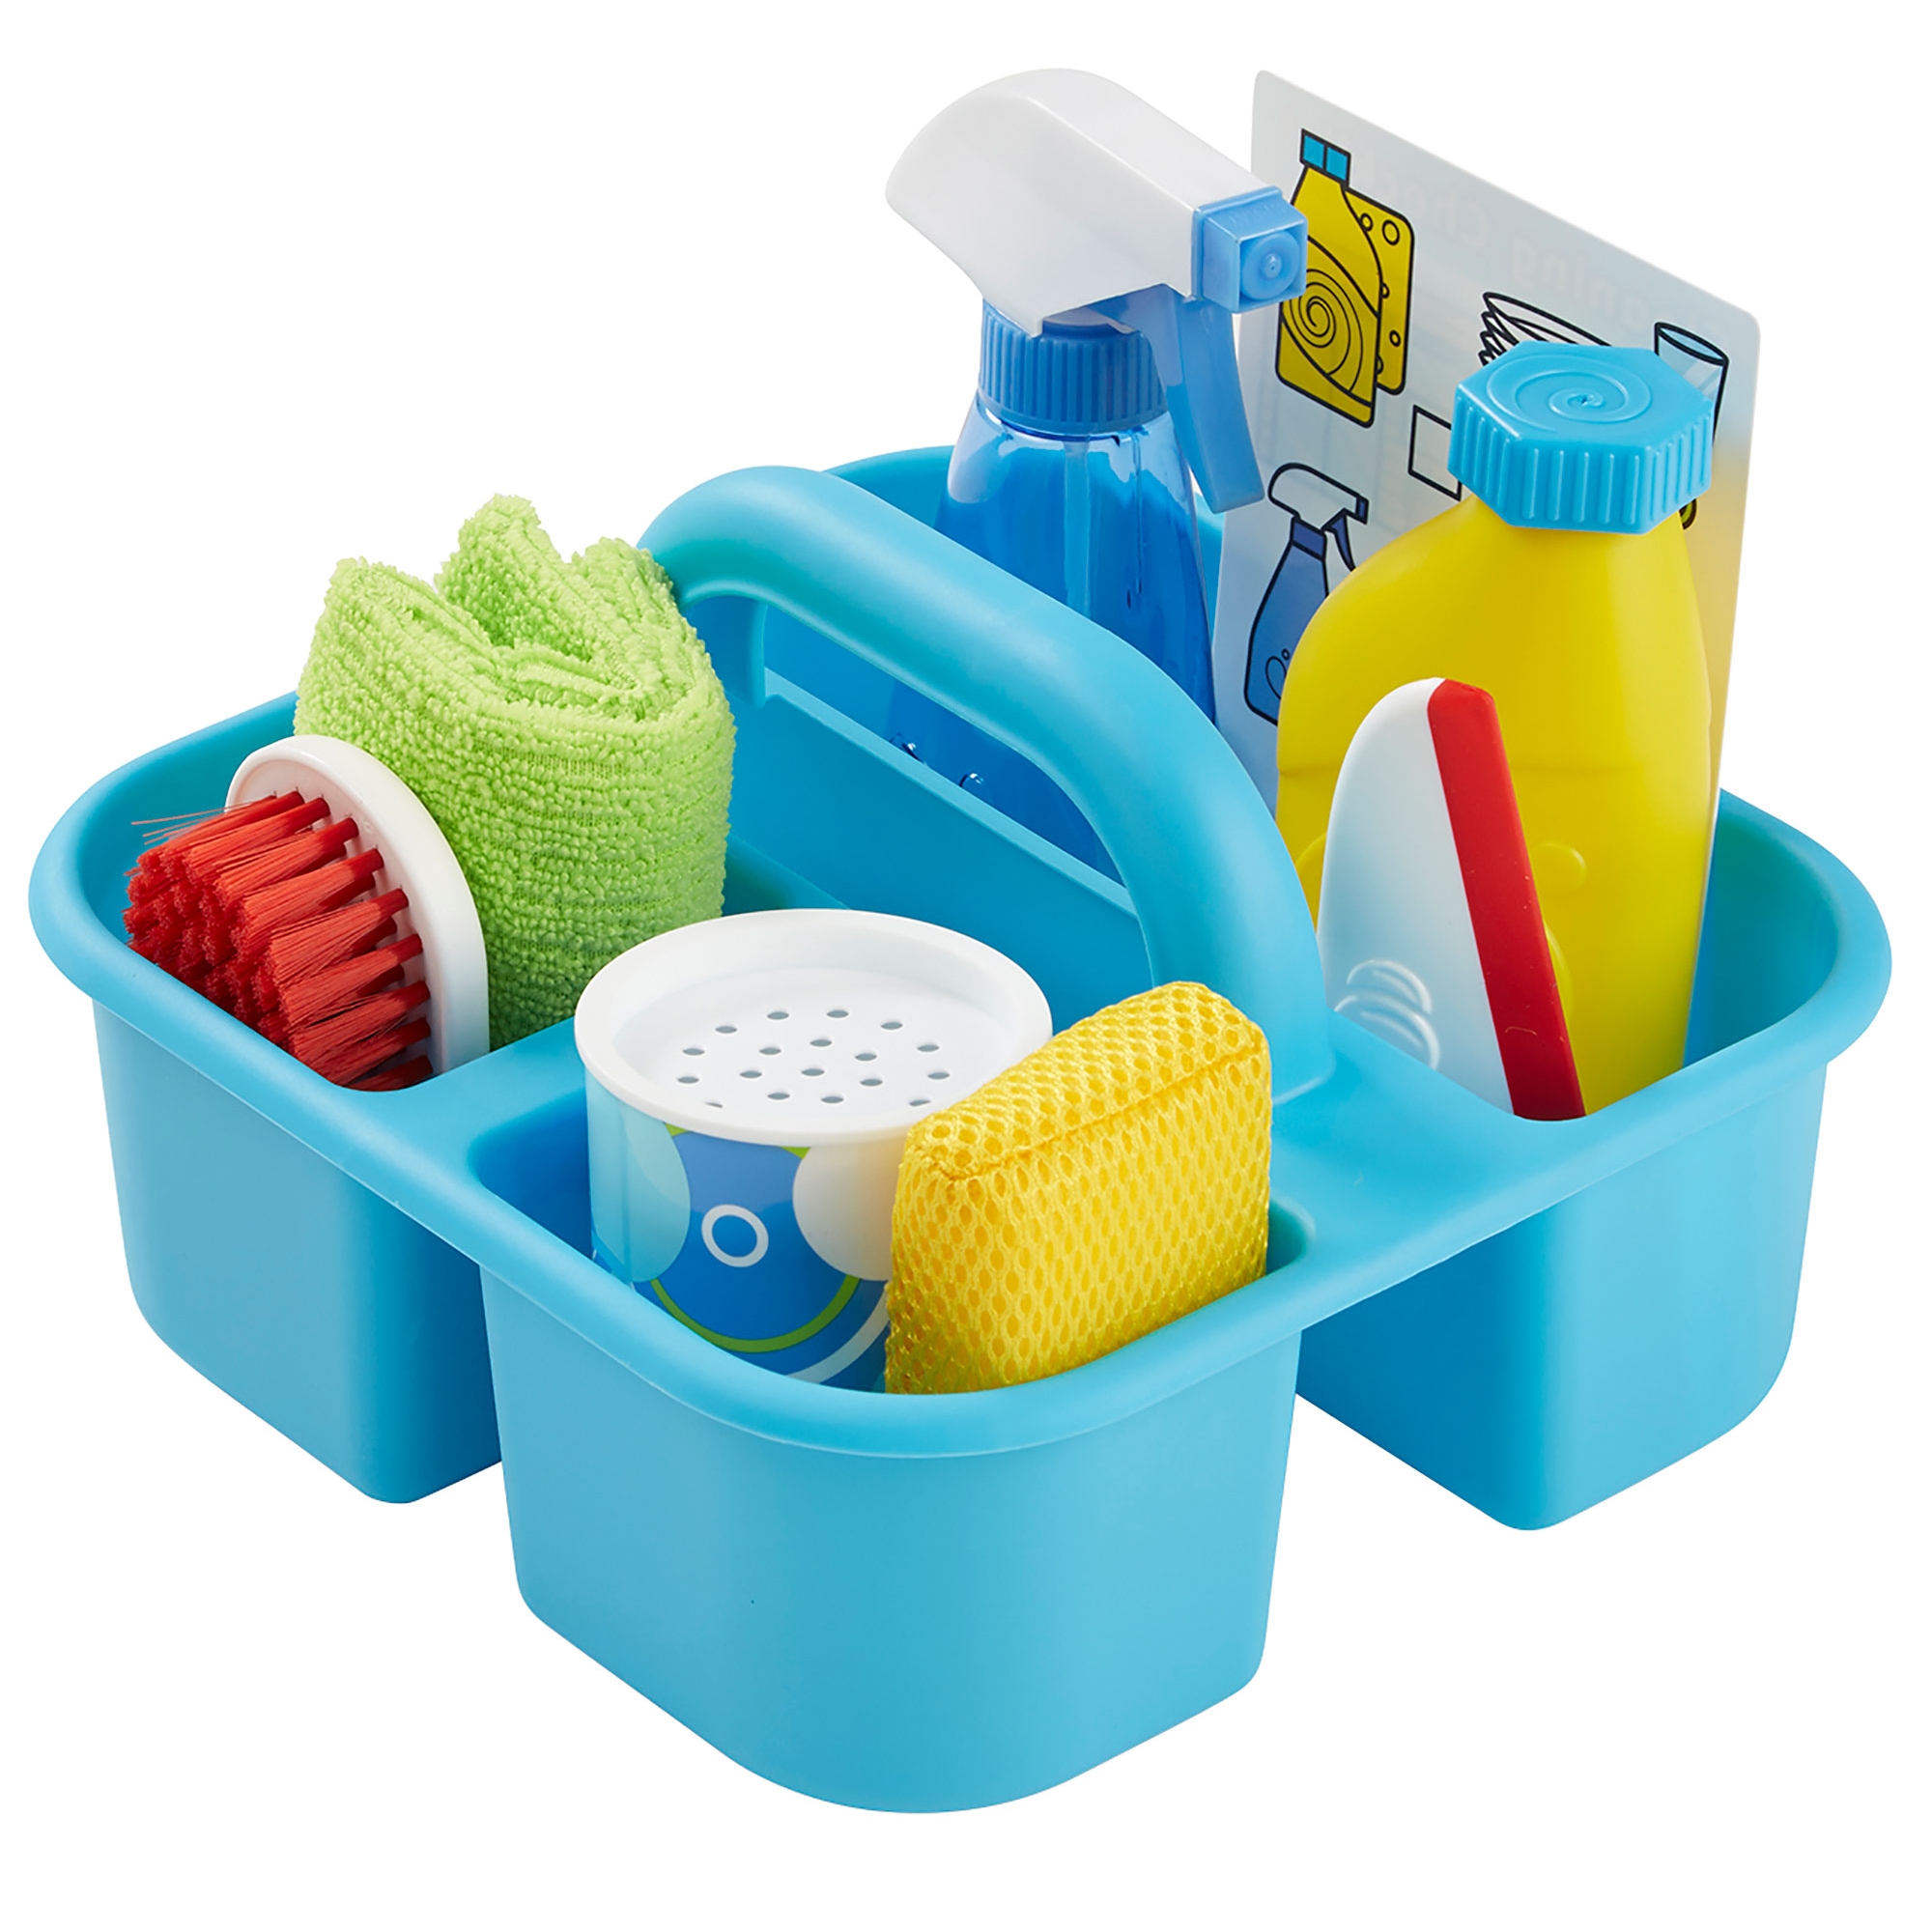 Cleaning and Laundry play set